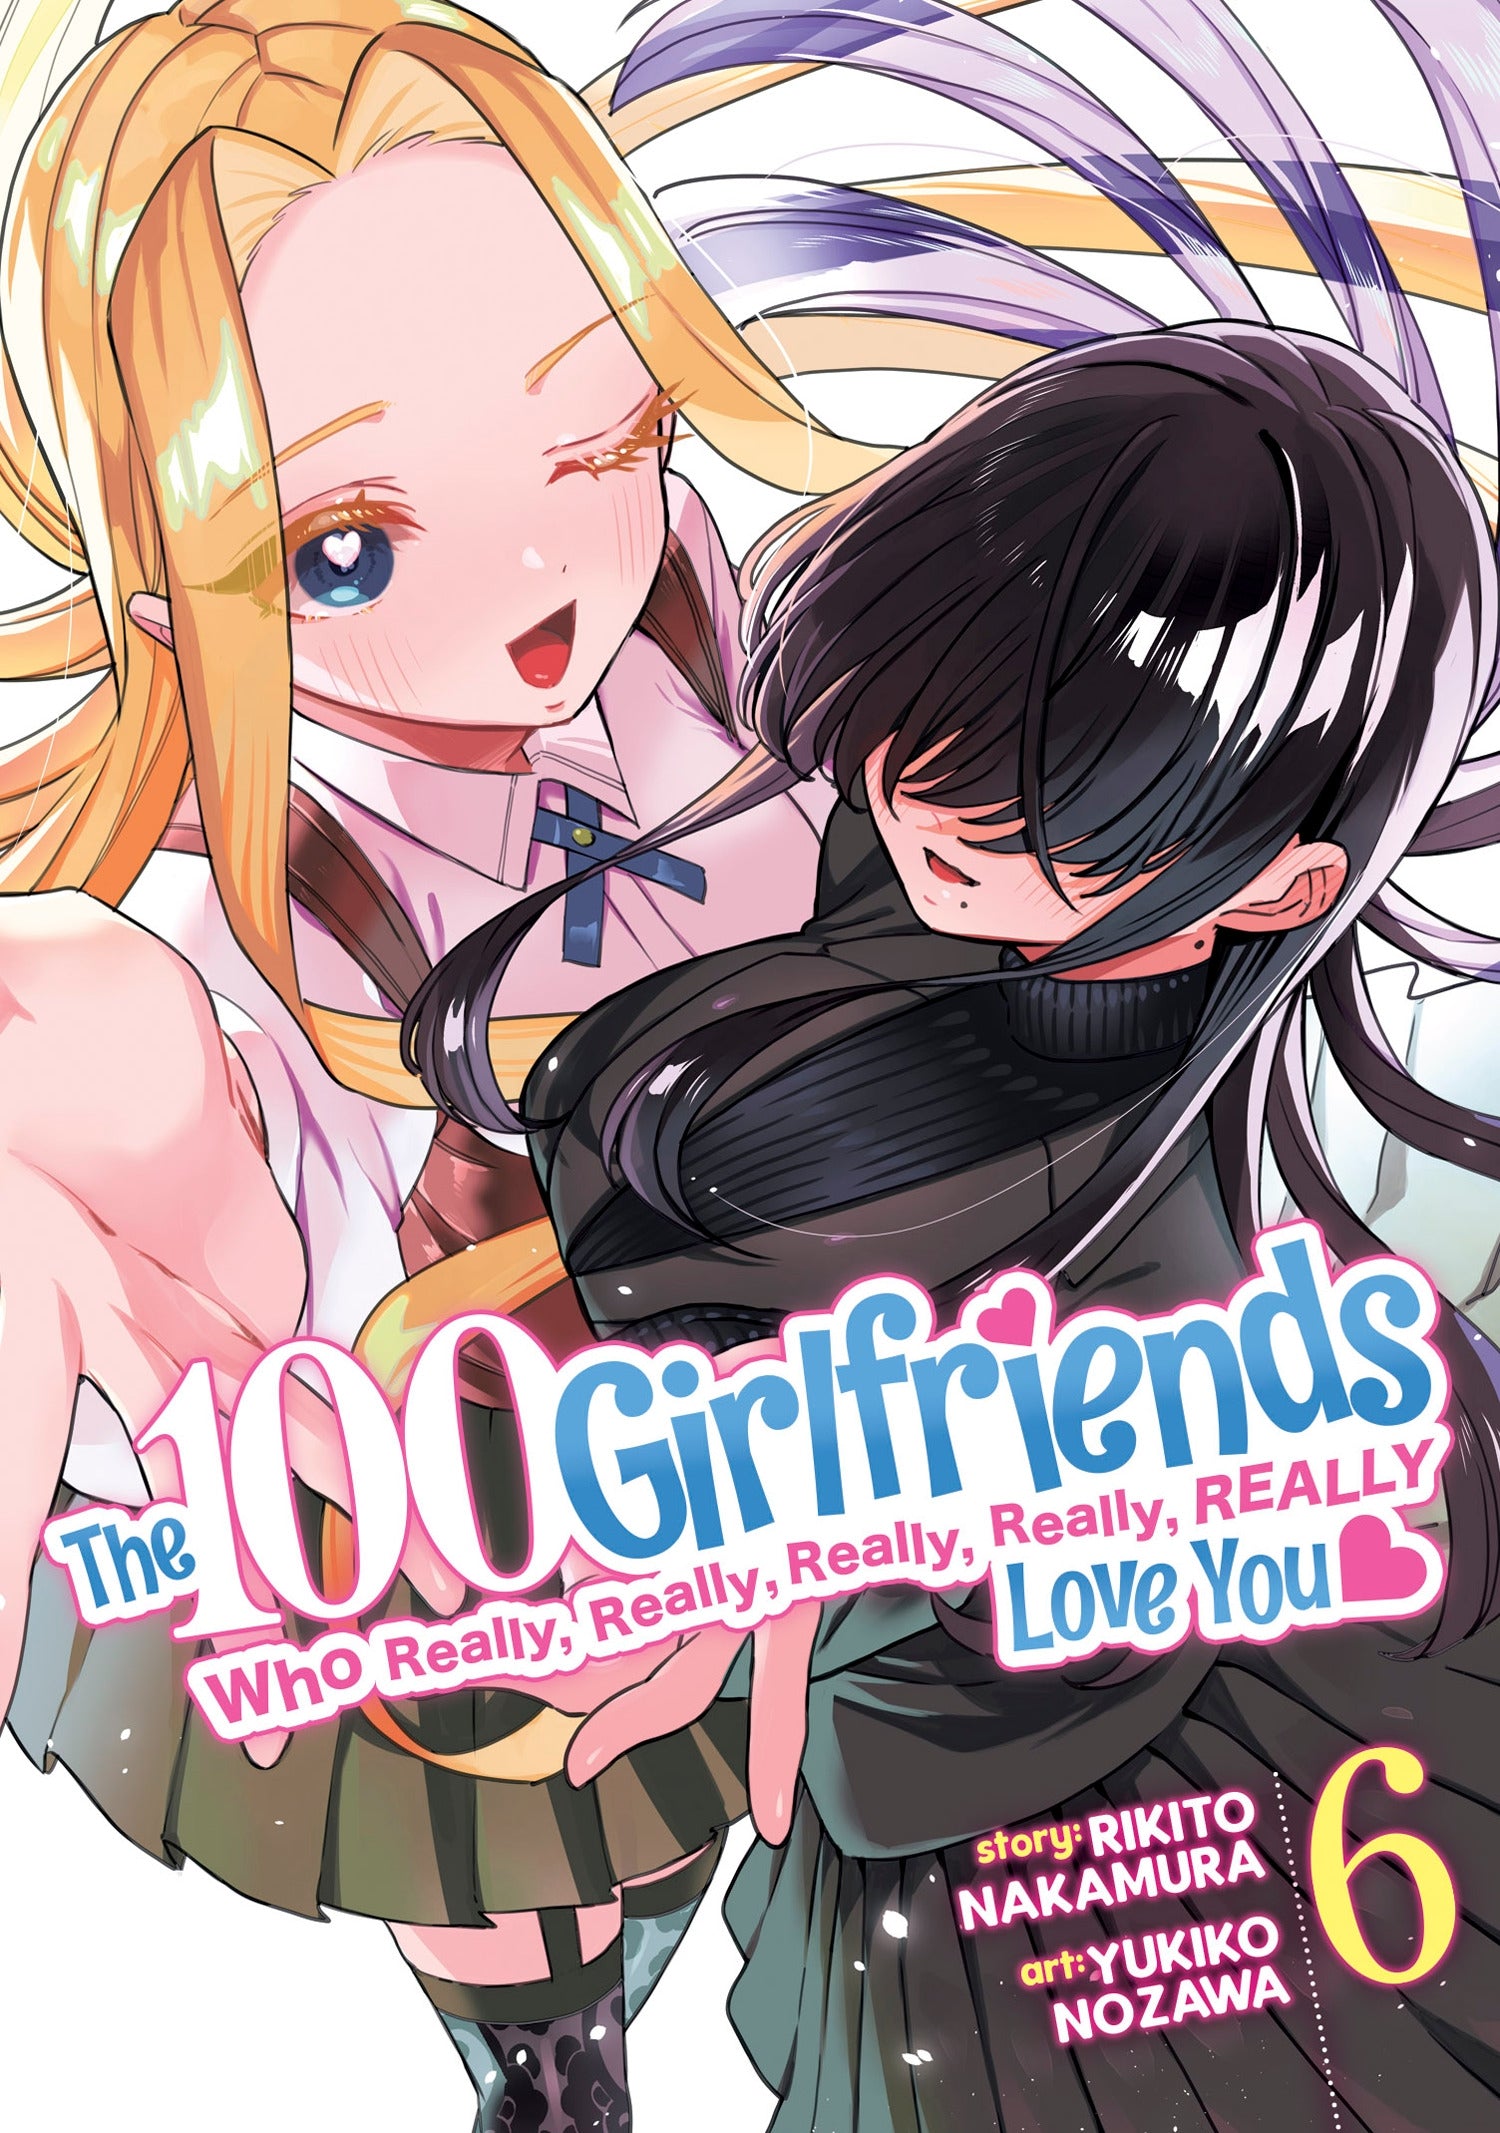 The 100 Girlfriends Who Really, Really, Really, Really, Really Love You, Vol. 6